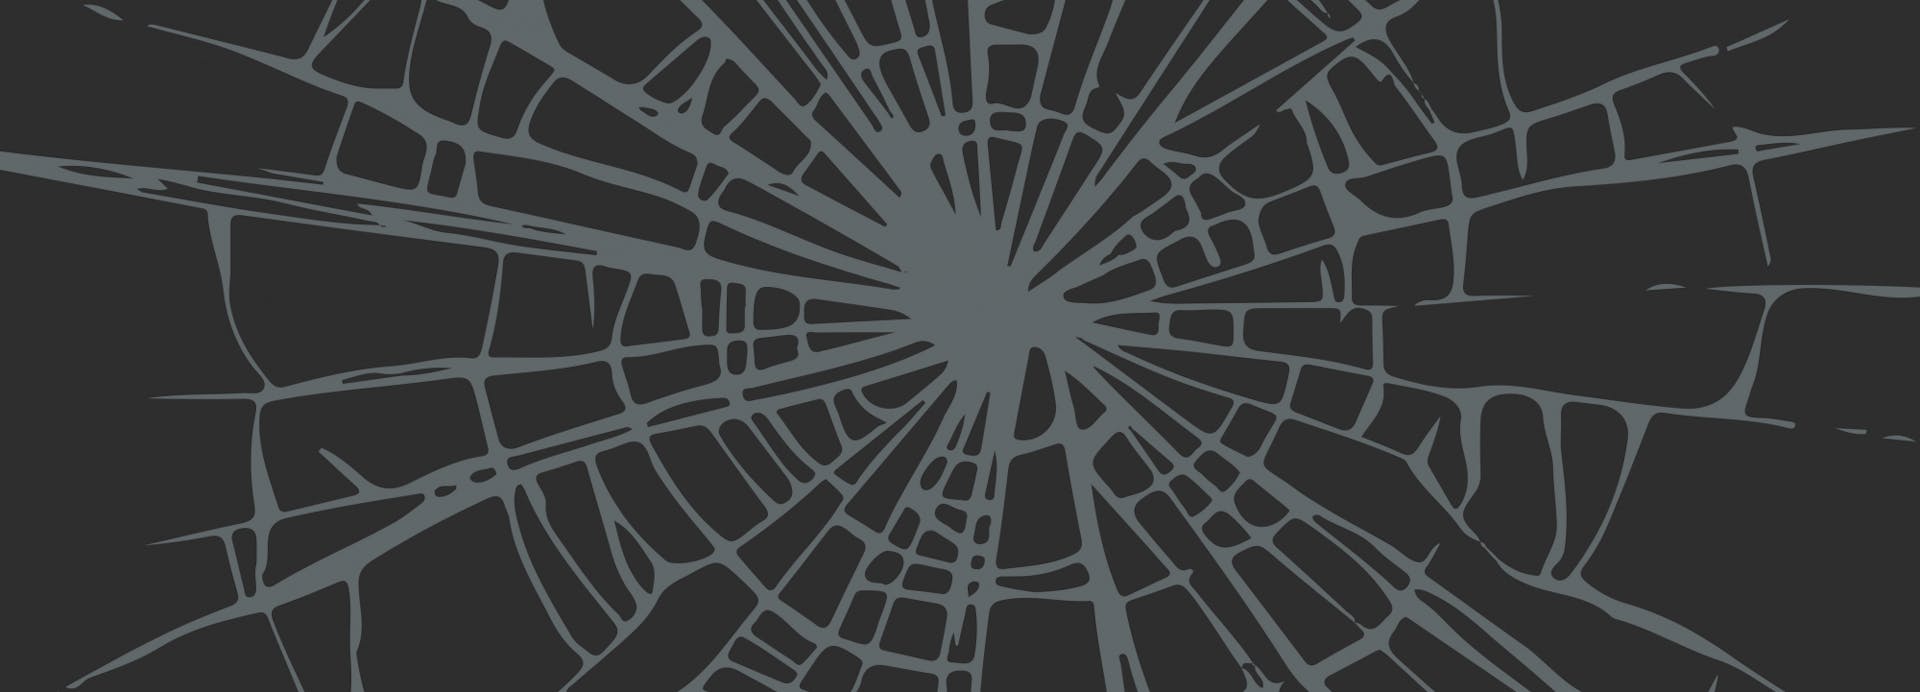 Illustration of a cracked screen.